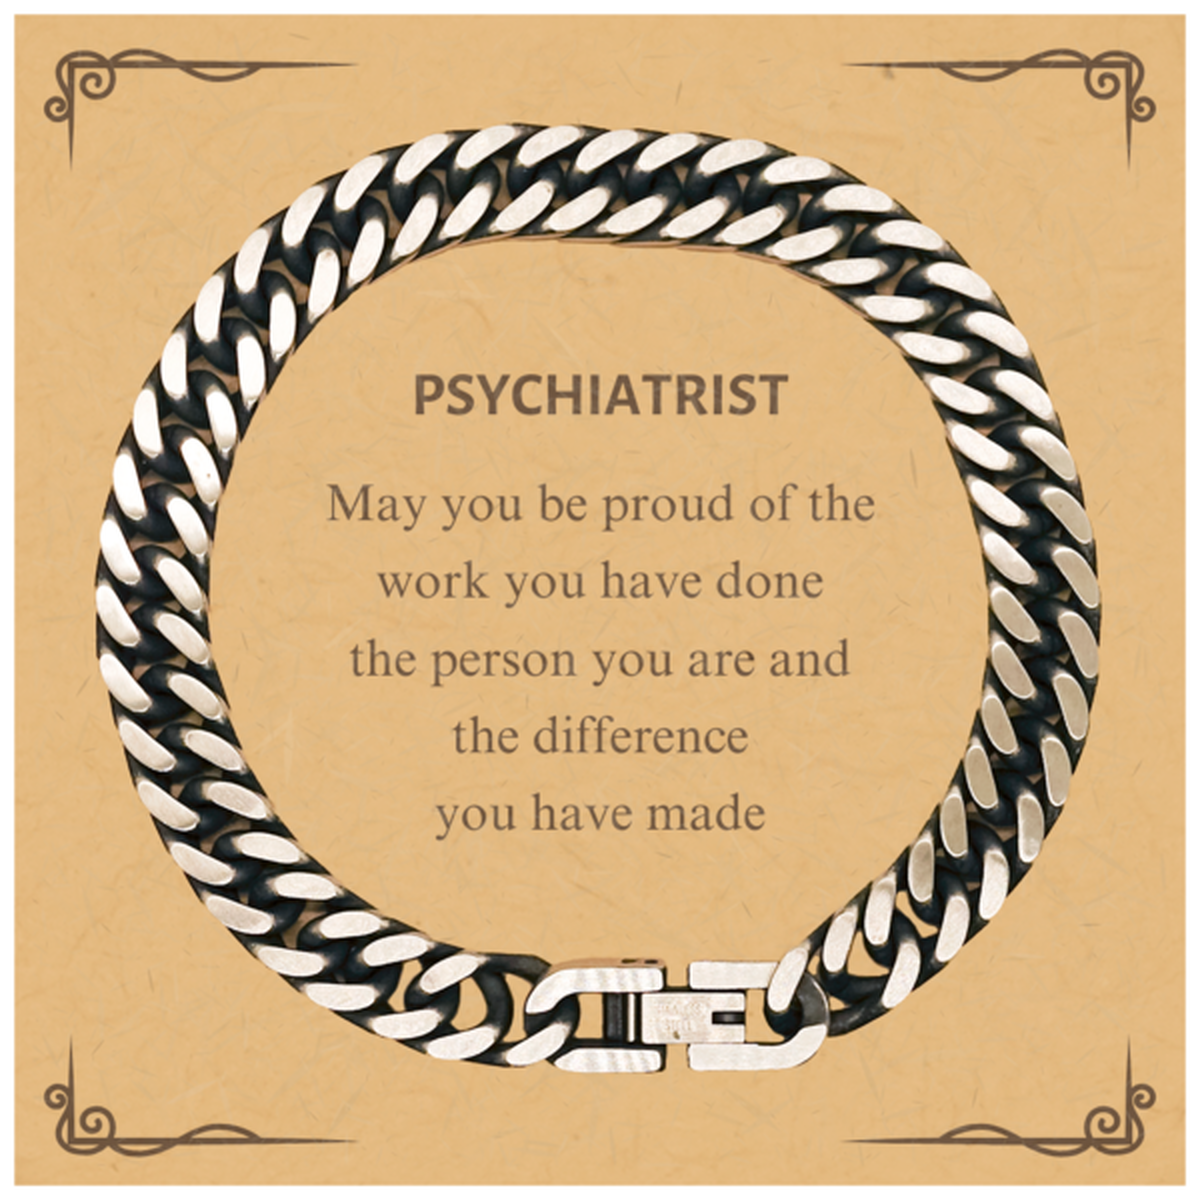 Psychiatrist May you be proud of the work you have done, Retirement Psychiatrist Cuban Link Chain Bracelet for Colleague Appreciation Gifts Amazing for Psychiatrist